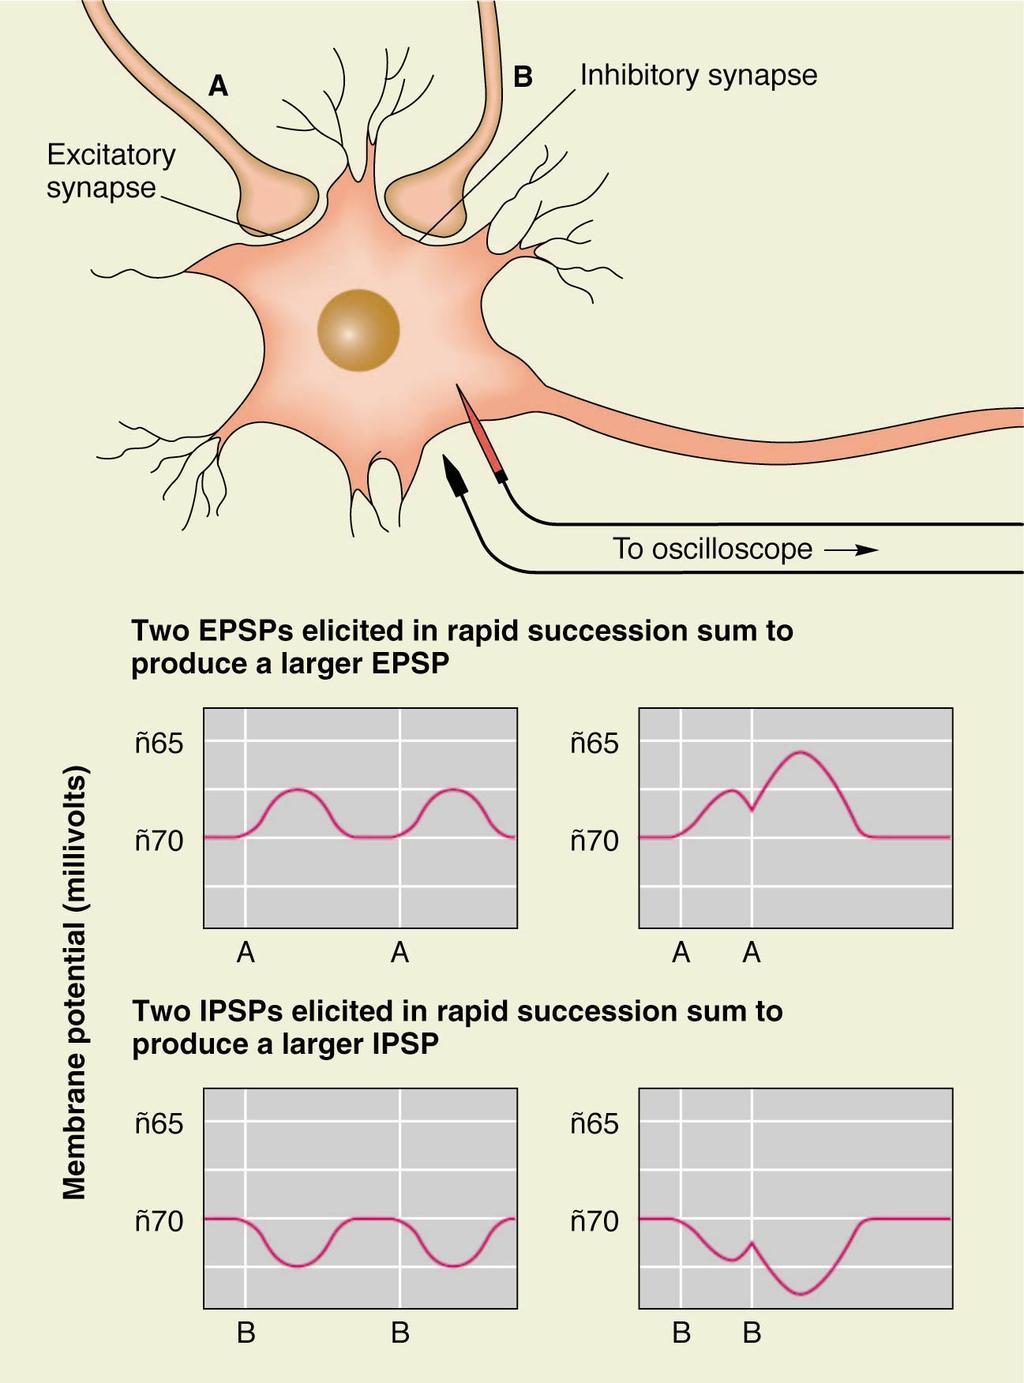 Neurons receive excitatory and inhibitory